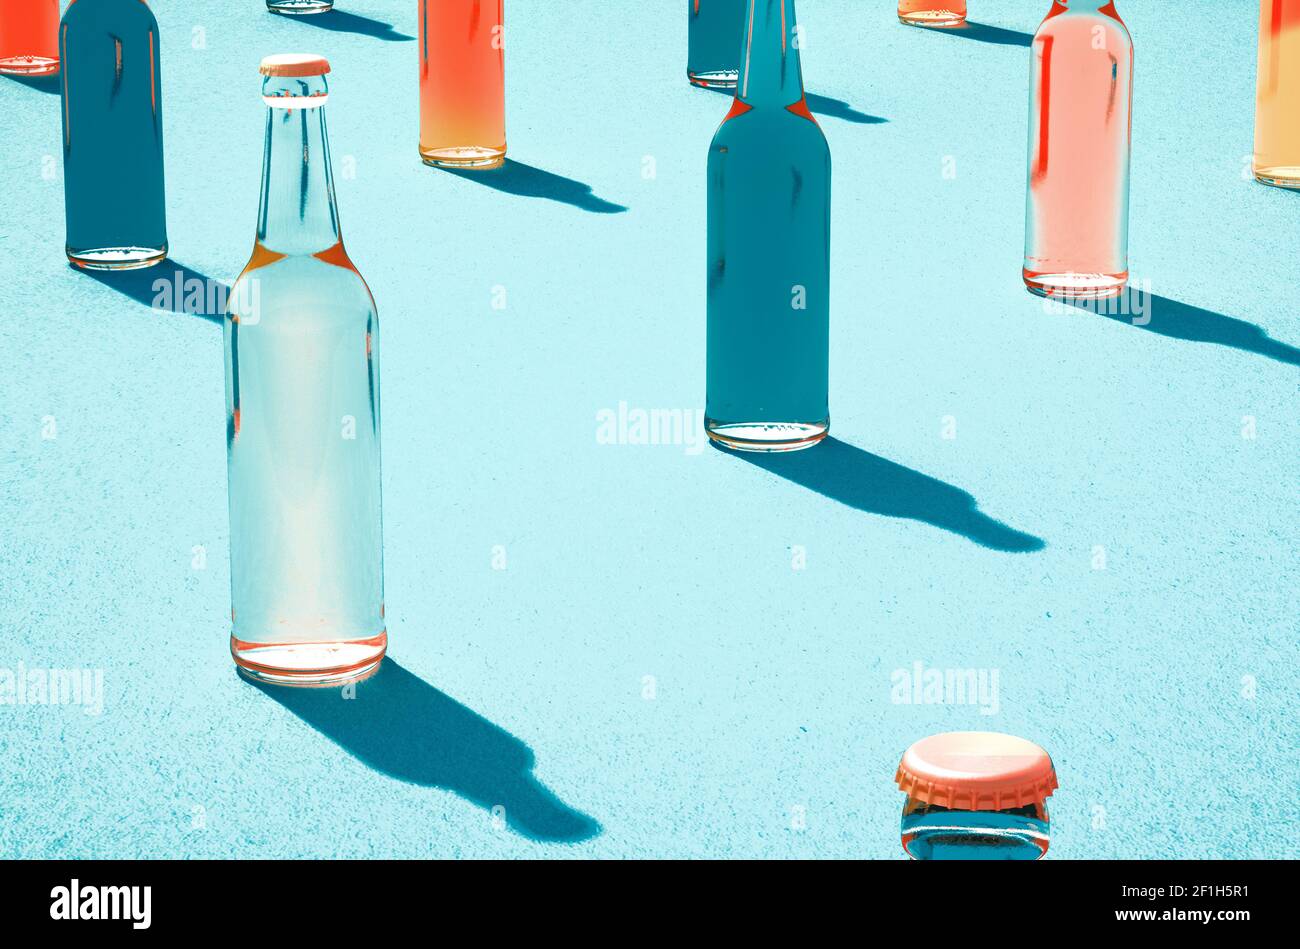 3d mockups of glass beer bottles with caps and without labels. Shadows on light blue surface. Retro drink bottle concept. Stock Photo